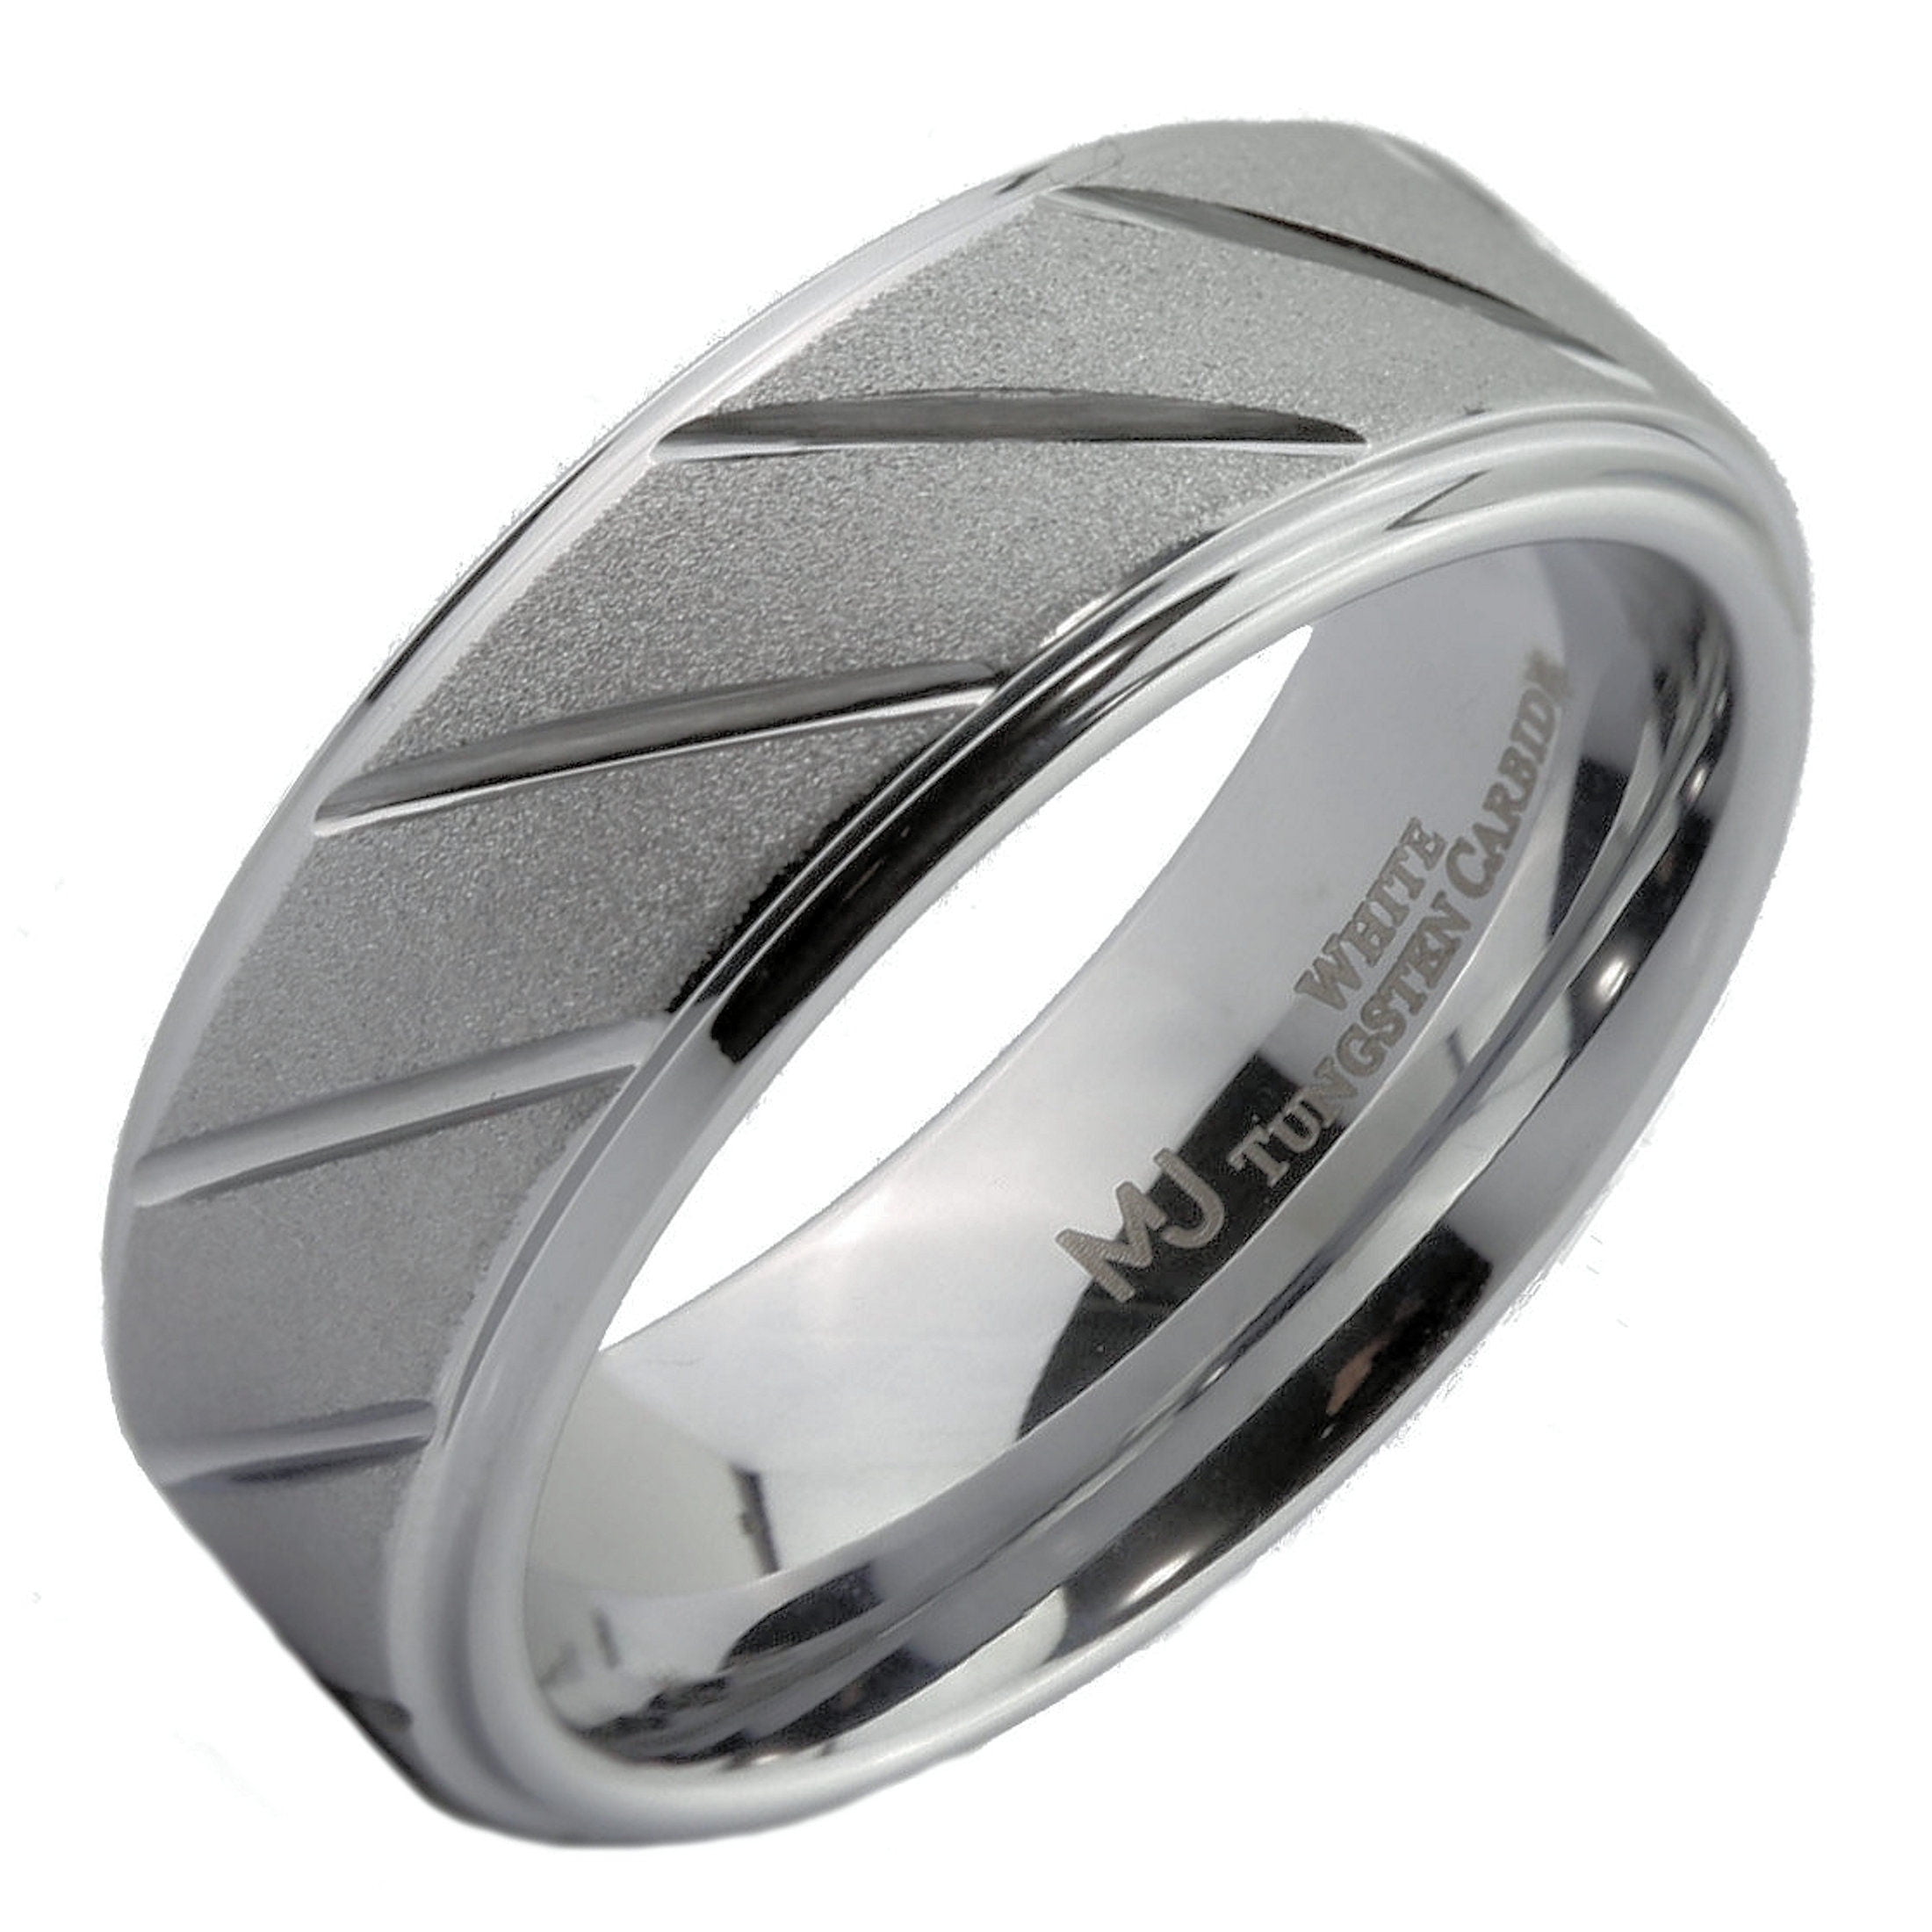 MJ Metals Jewelry Unisex Adult White Tungsten Carbide 8mm Sand  Blasted/Diagonal Lines Ring Size 9 